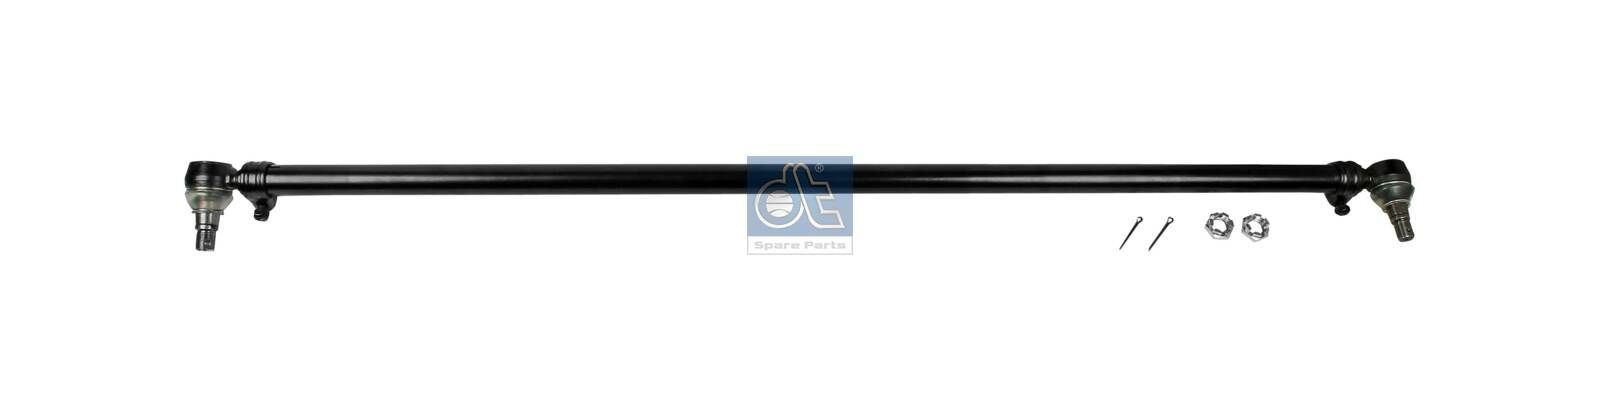 DT Spare Parts 6.53018 Rod Assembly 5010 566 051